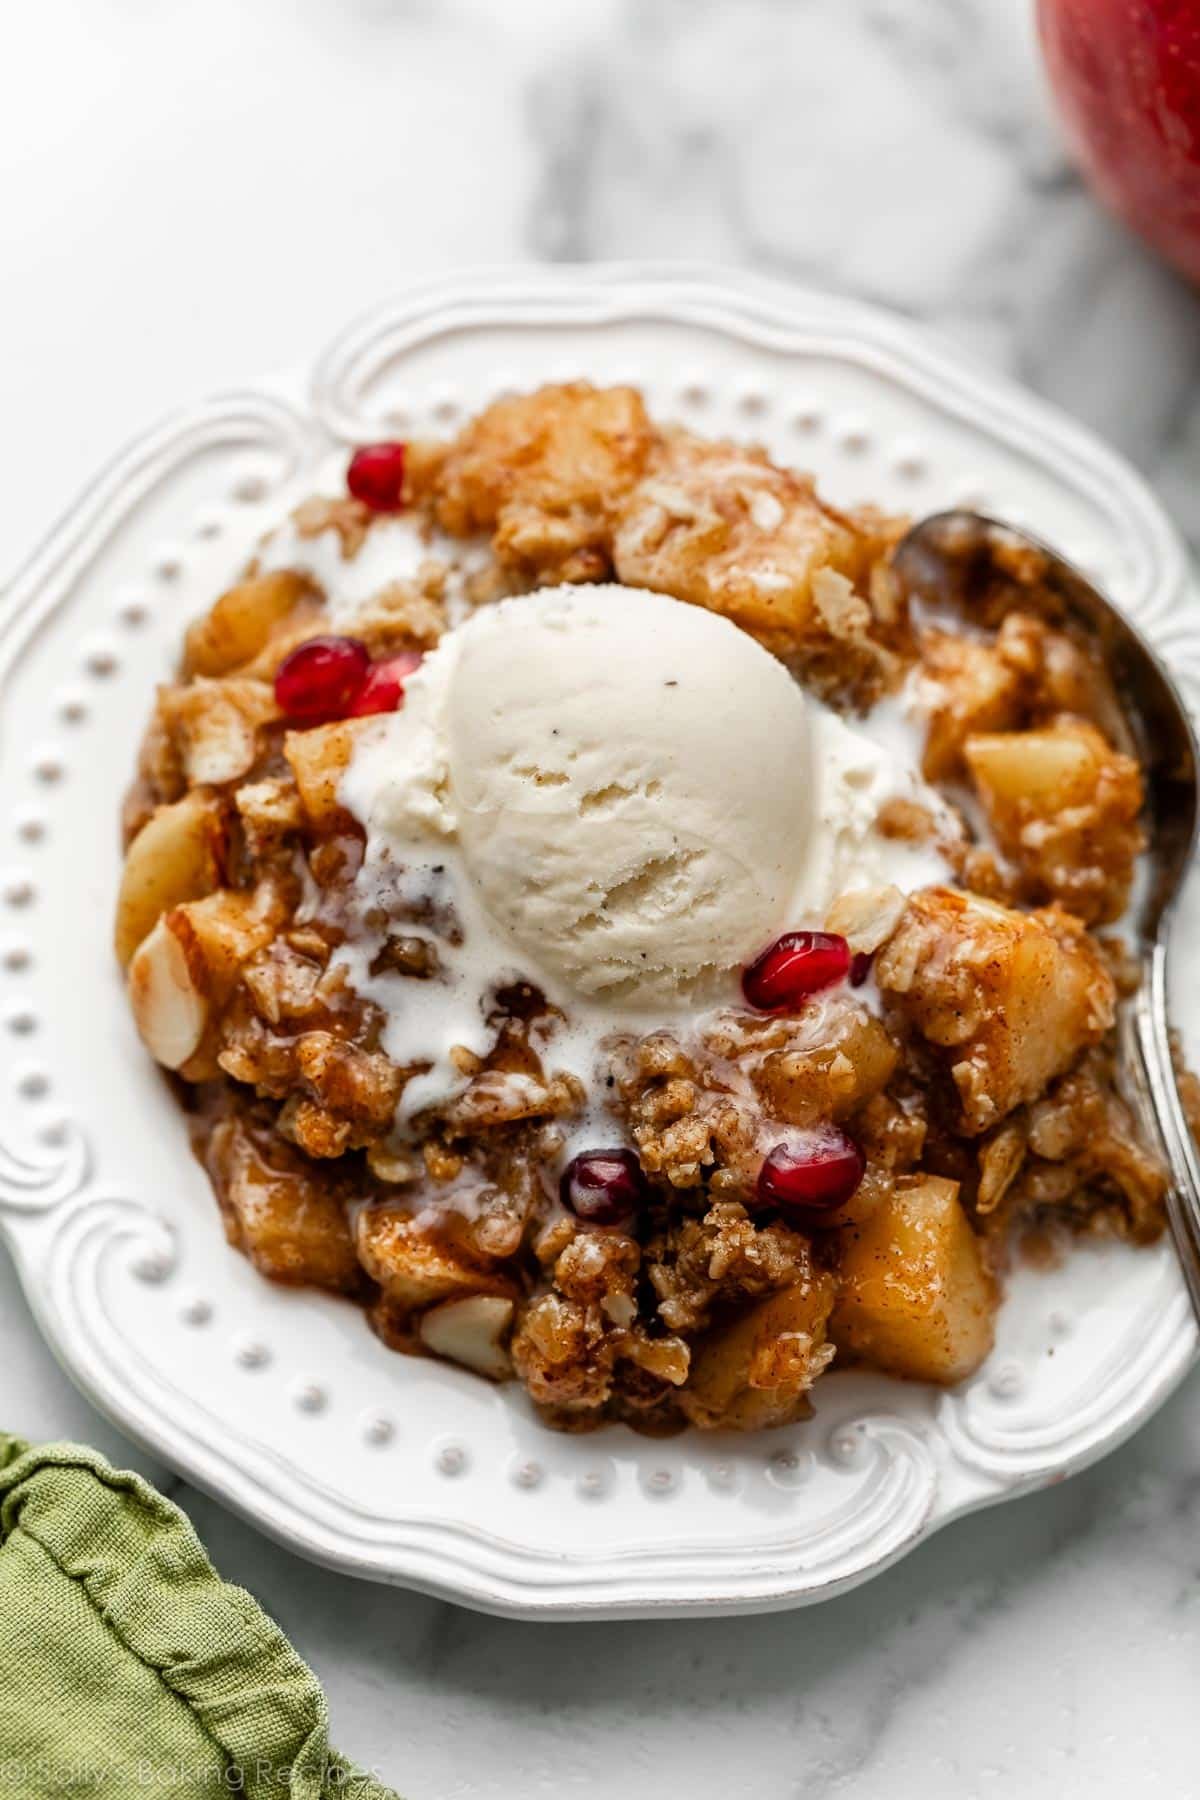 serving of gluten free almond apple crisp with ice cream on top on white plate.